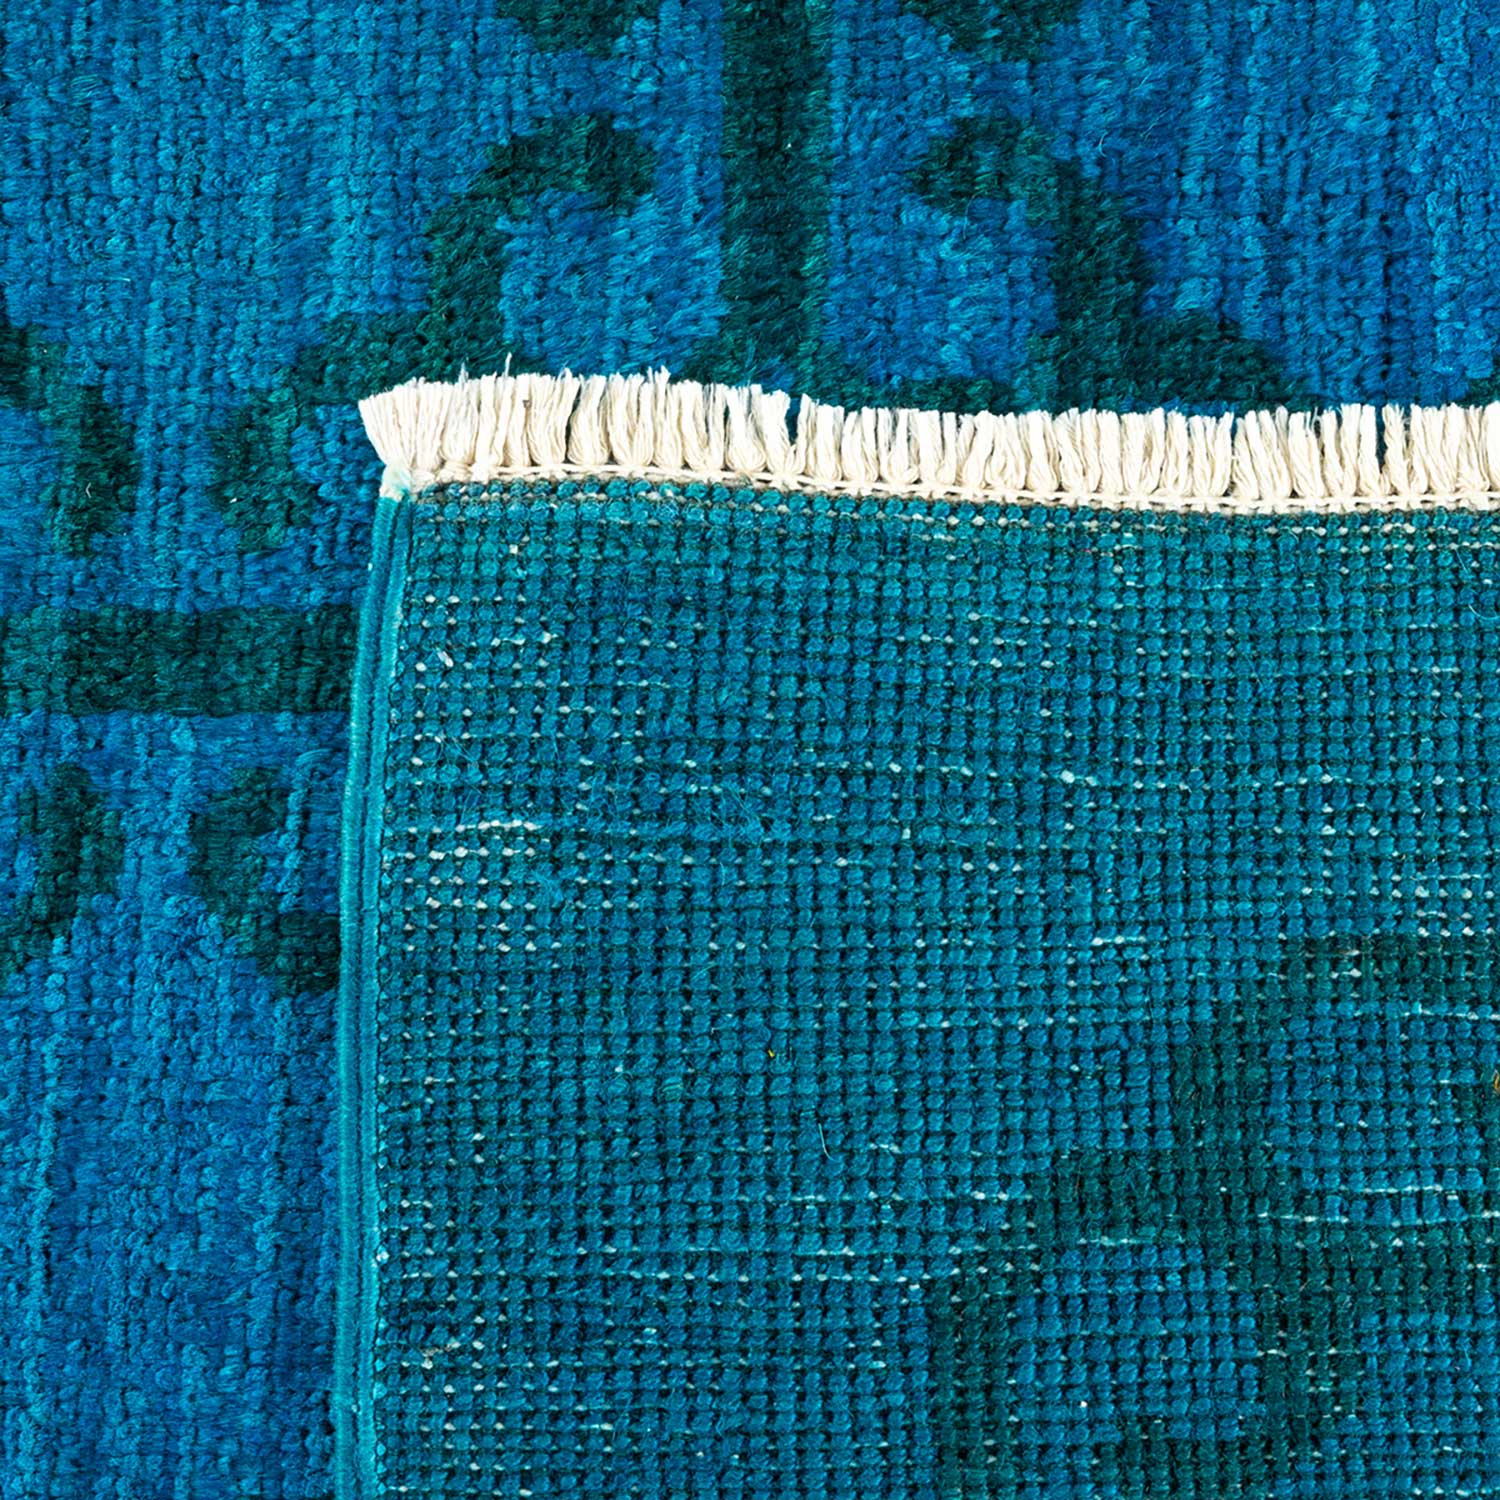 Close-up shot of a vibrant teal textured fabric with fringe.